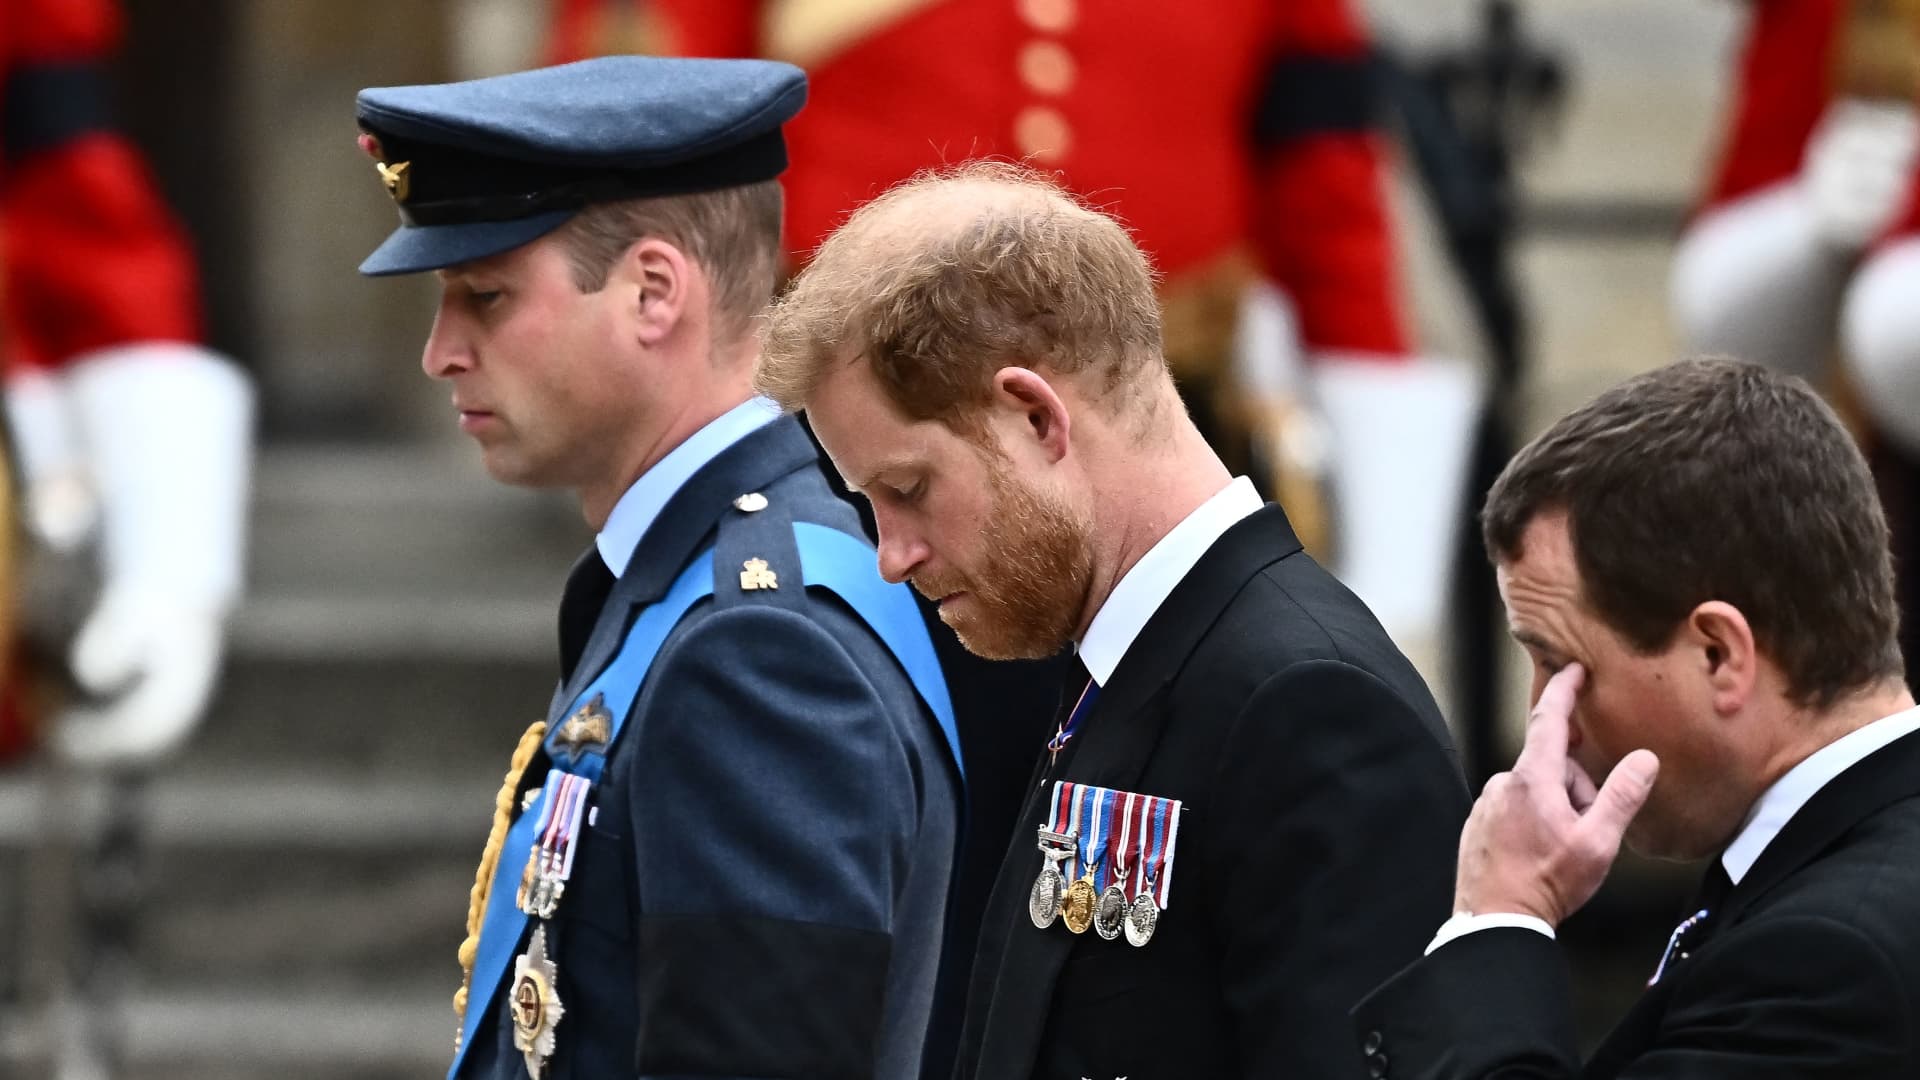 Britain's Prince William, Prince of Wales (L) and Britain's Prince Harry (C), Duke of Sussex arrive at Westminster Abbey in London on September 19, 2022, for the State Funeral Service for Britain's Queen Elizabeth II.